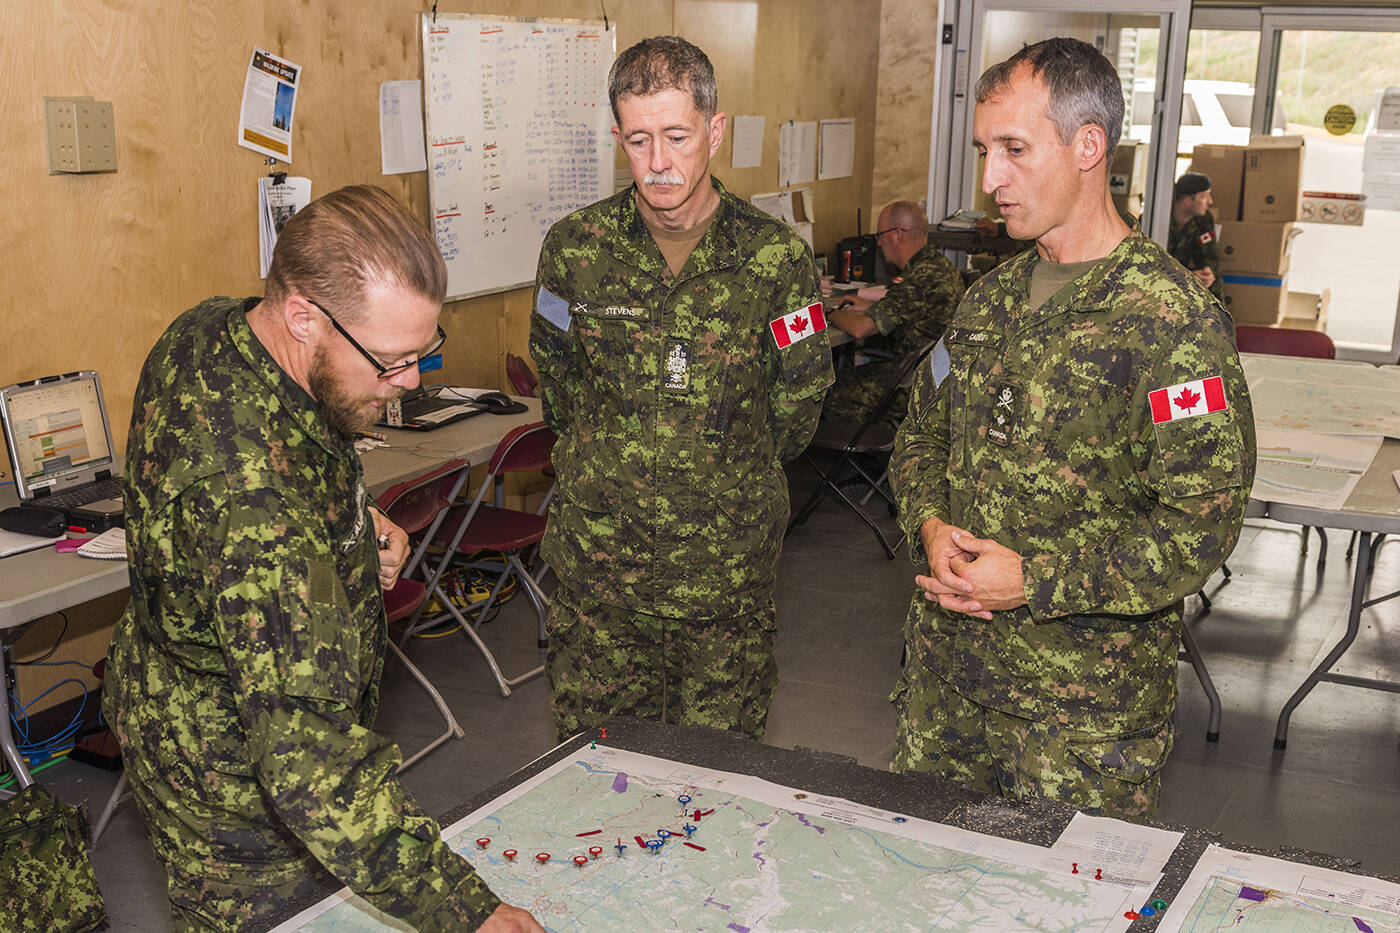 Warrant Officer Terry Vandenberghe discusses observation and reporting positions with Brigadier-General Trevor Cadieu (right) in Williams Lake, B.C., during Operation LENTUS 17-04 on August 3, 2017. (Photo: Master Corporal Malcolm Byers, Wainwright Garrison Imaging)